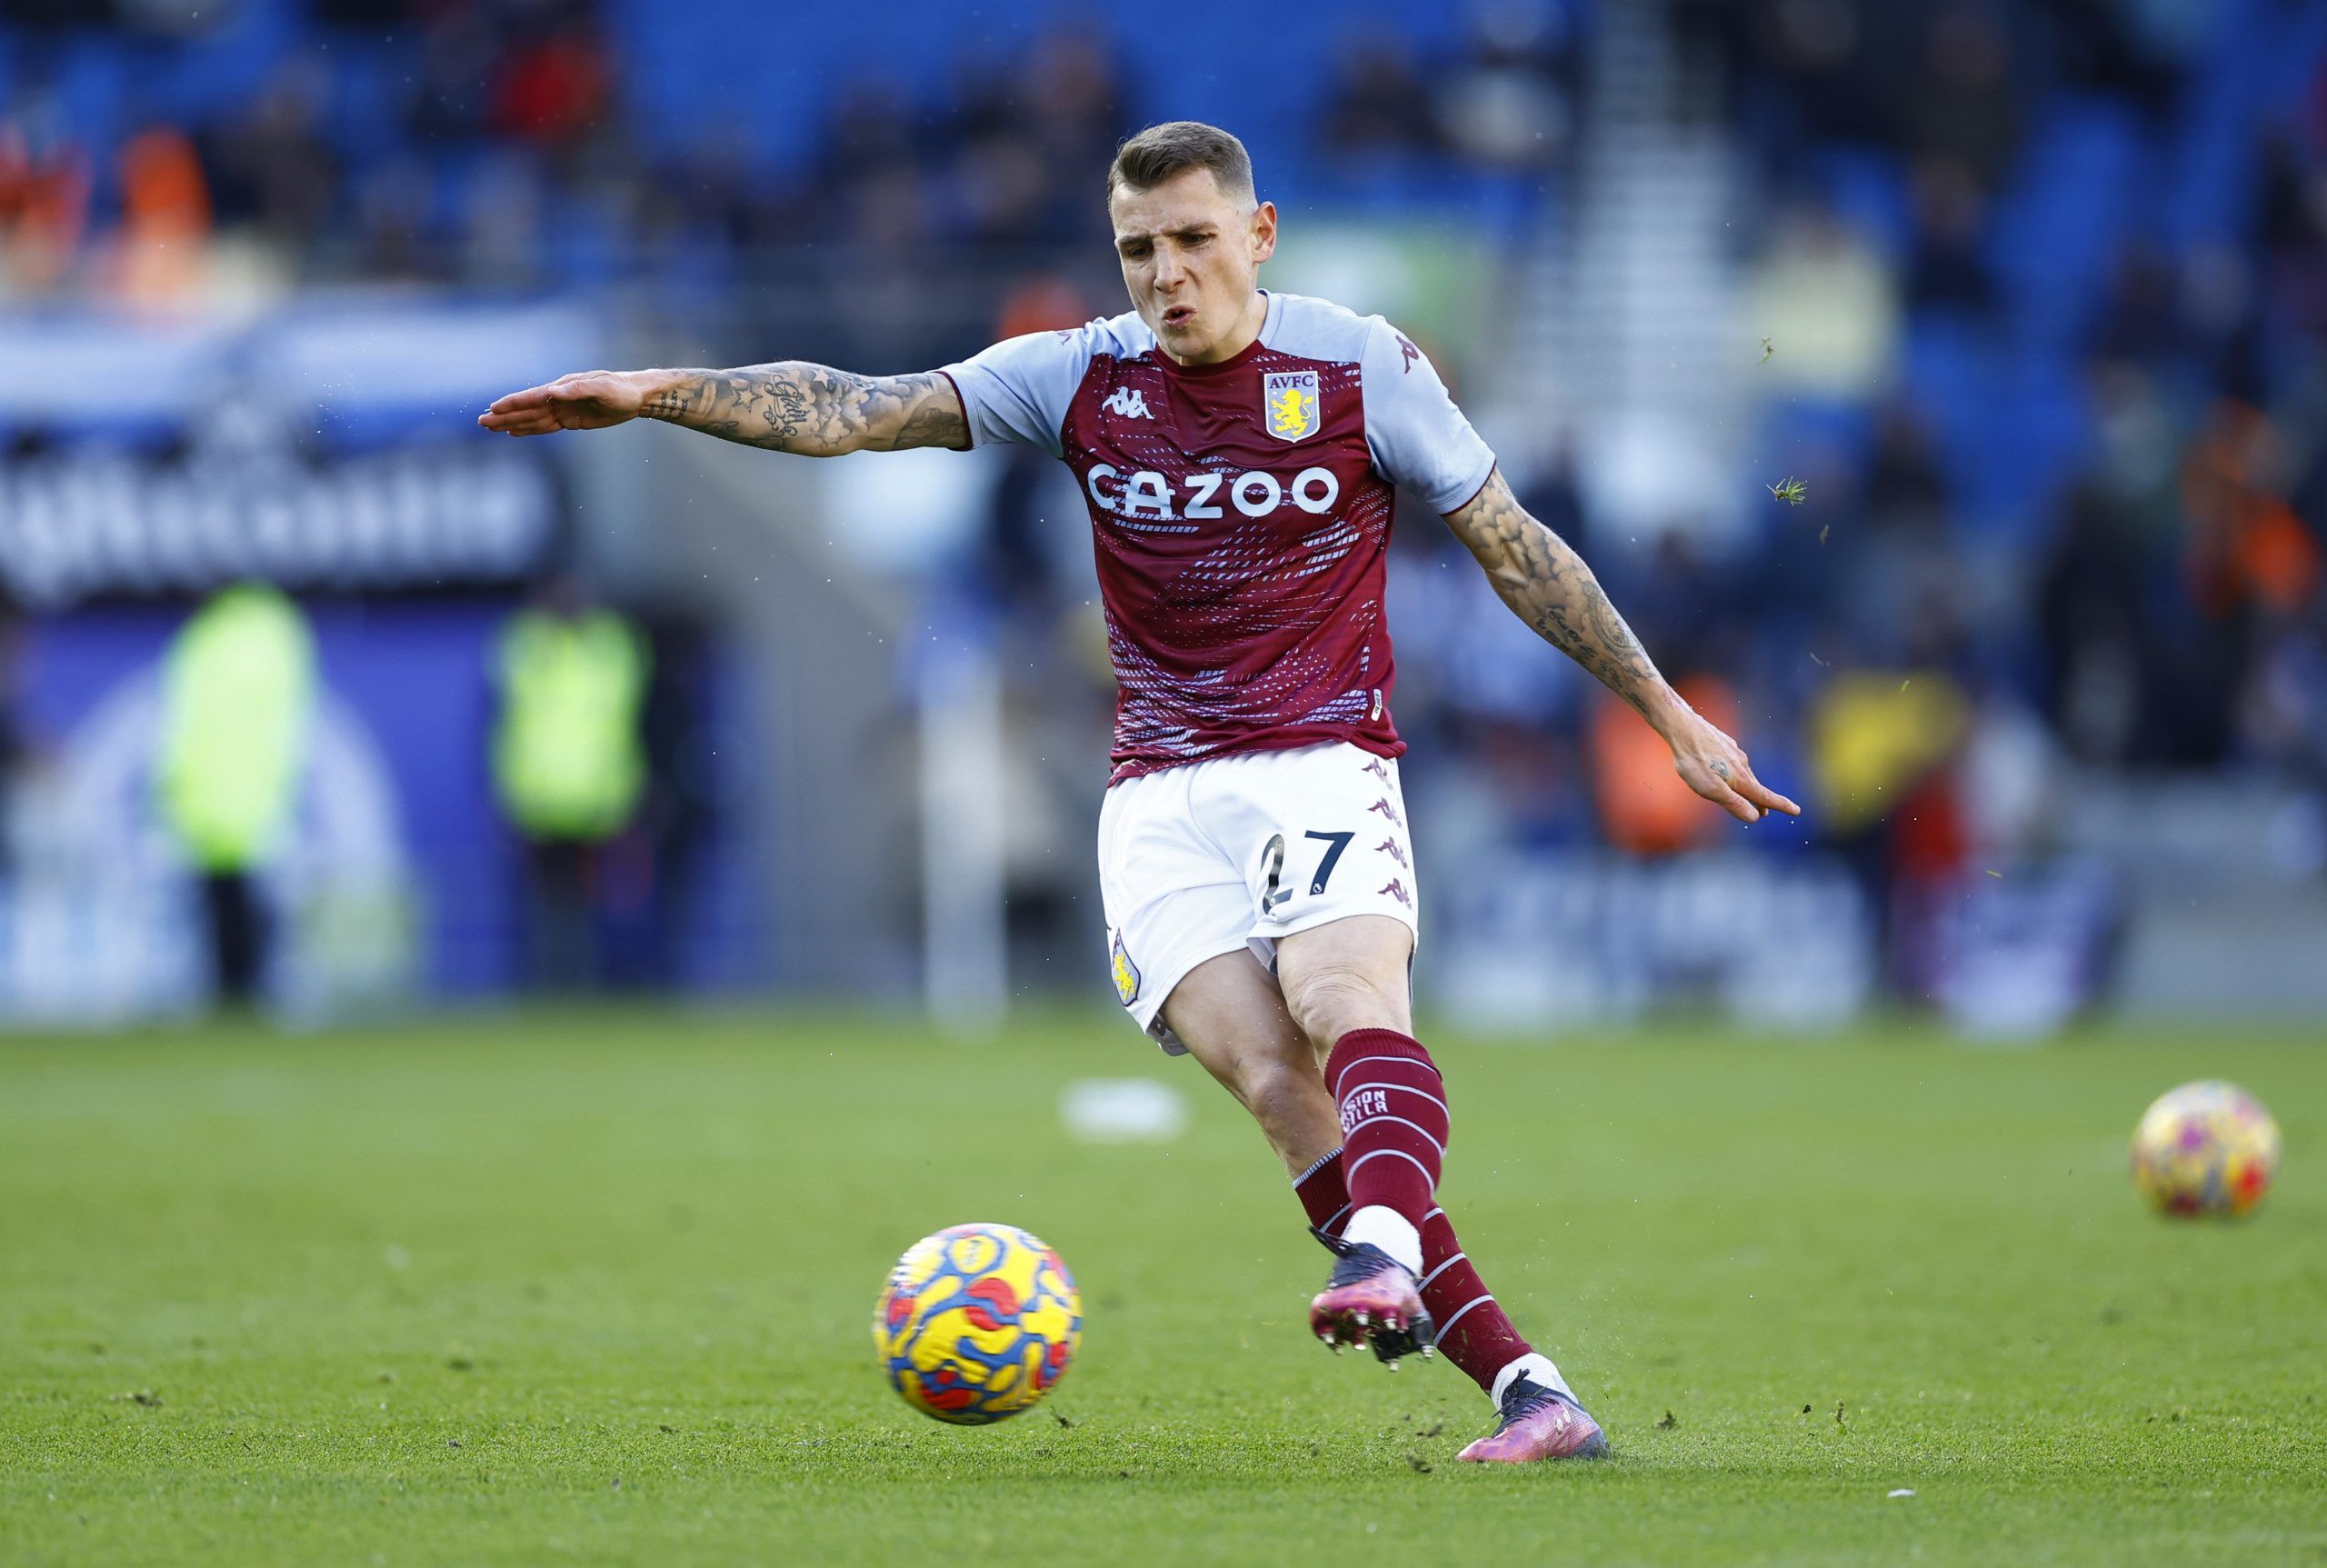 Soccer Football - Premier League - Brighton &amp; Hove Albion v Aston Villa - The American Express Community Stadium, Brighton, Britain - February 26, 2022  Aston Villa's Lucas Digne during the warm up before the match Action Images via Reuters/Andrew Boyers EDITORIAL USE ONLY. No use with unauthorized audio, video, data, fixture lists, club/league logos or 'live' services. Online in-match use limited to 75 images, no video emulation. No use in betting, games or single club /league/player public